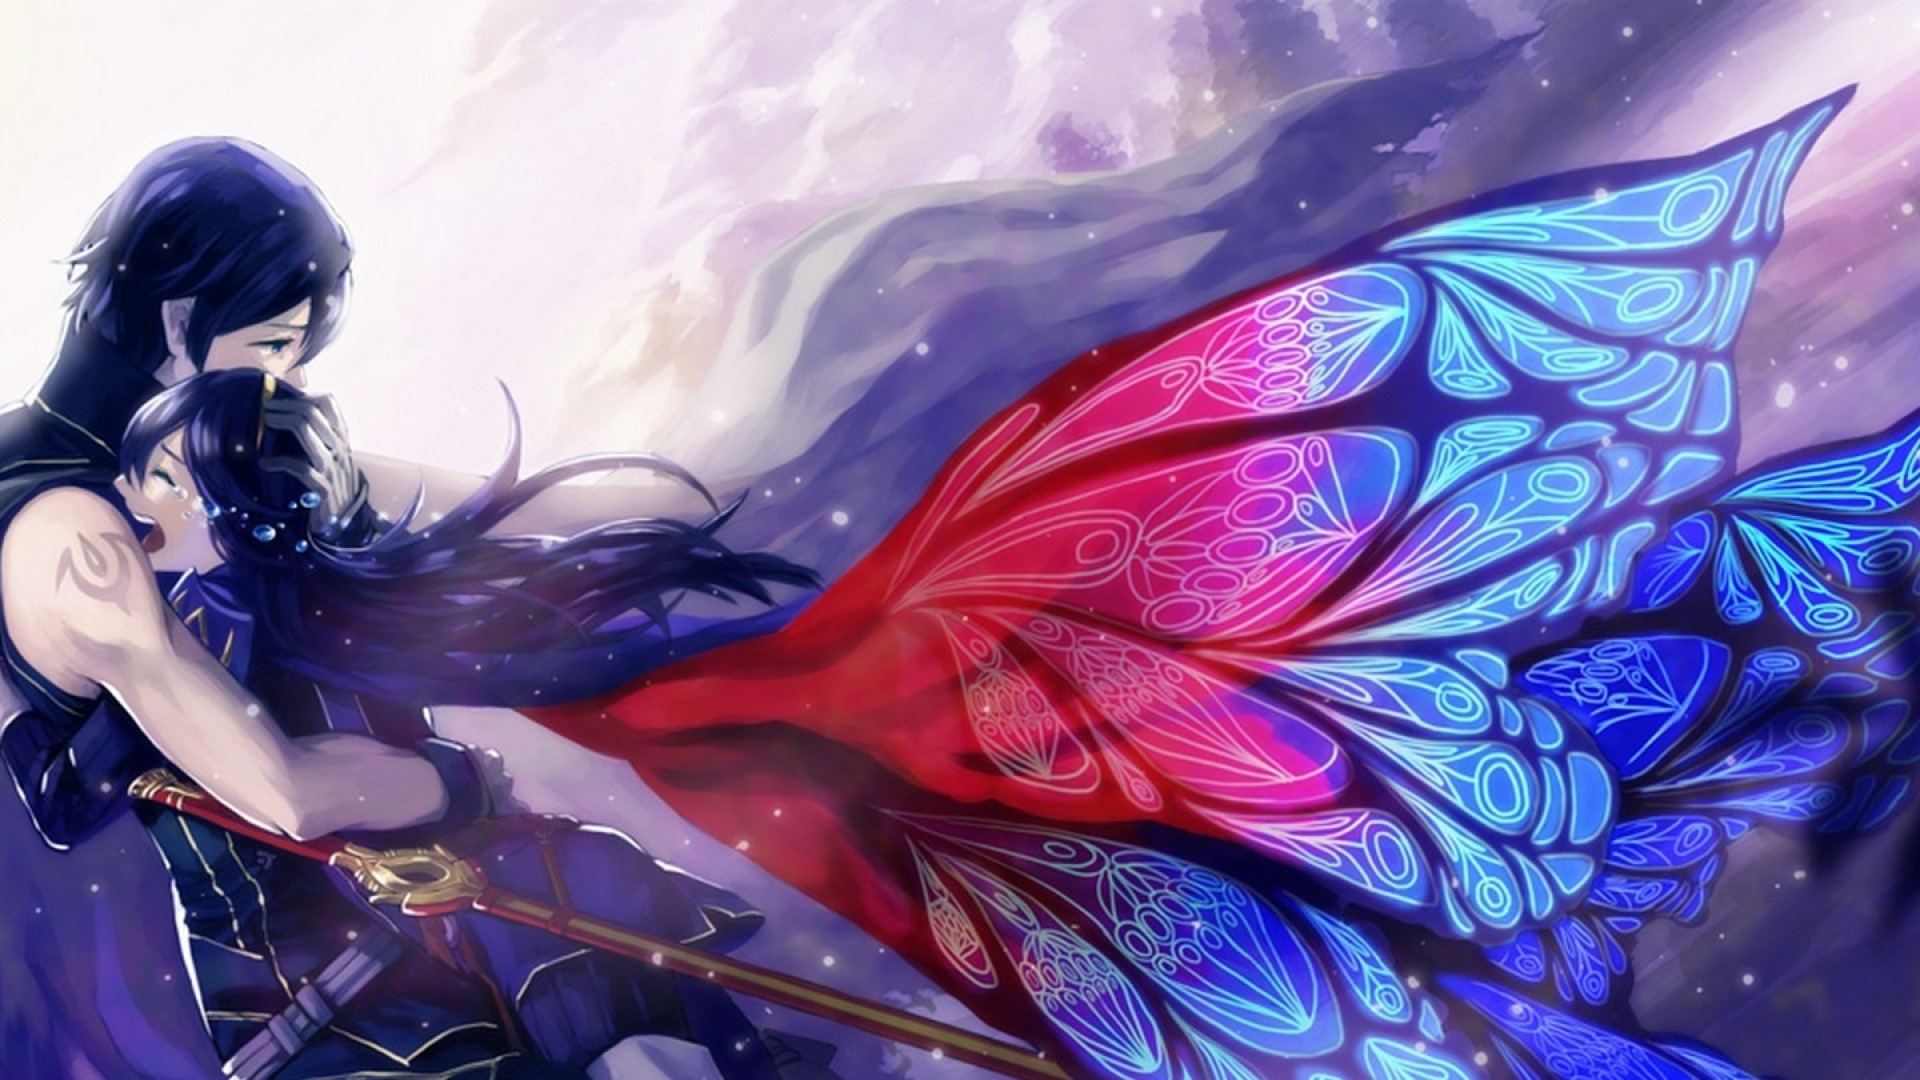 Download wallpaper love, wings, anime, tears, art, pair, anime art, anime  love, anime couple, section other in resolution 1920x1080